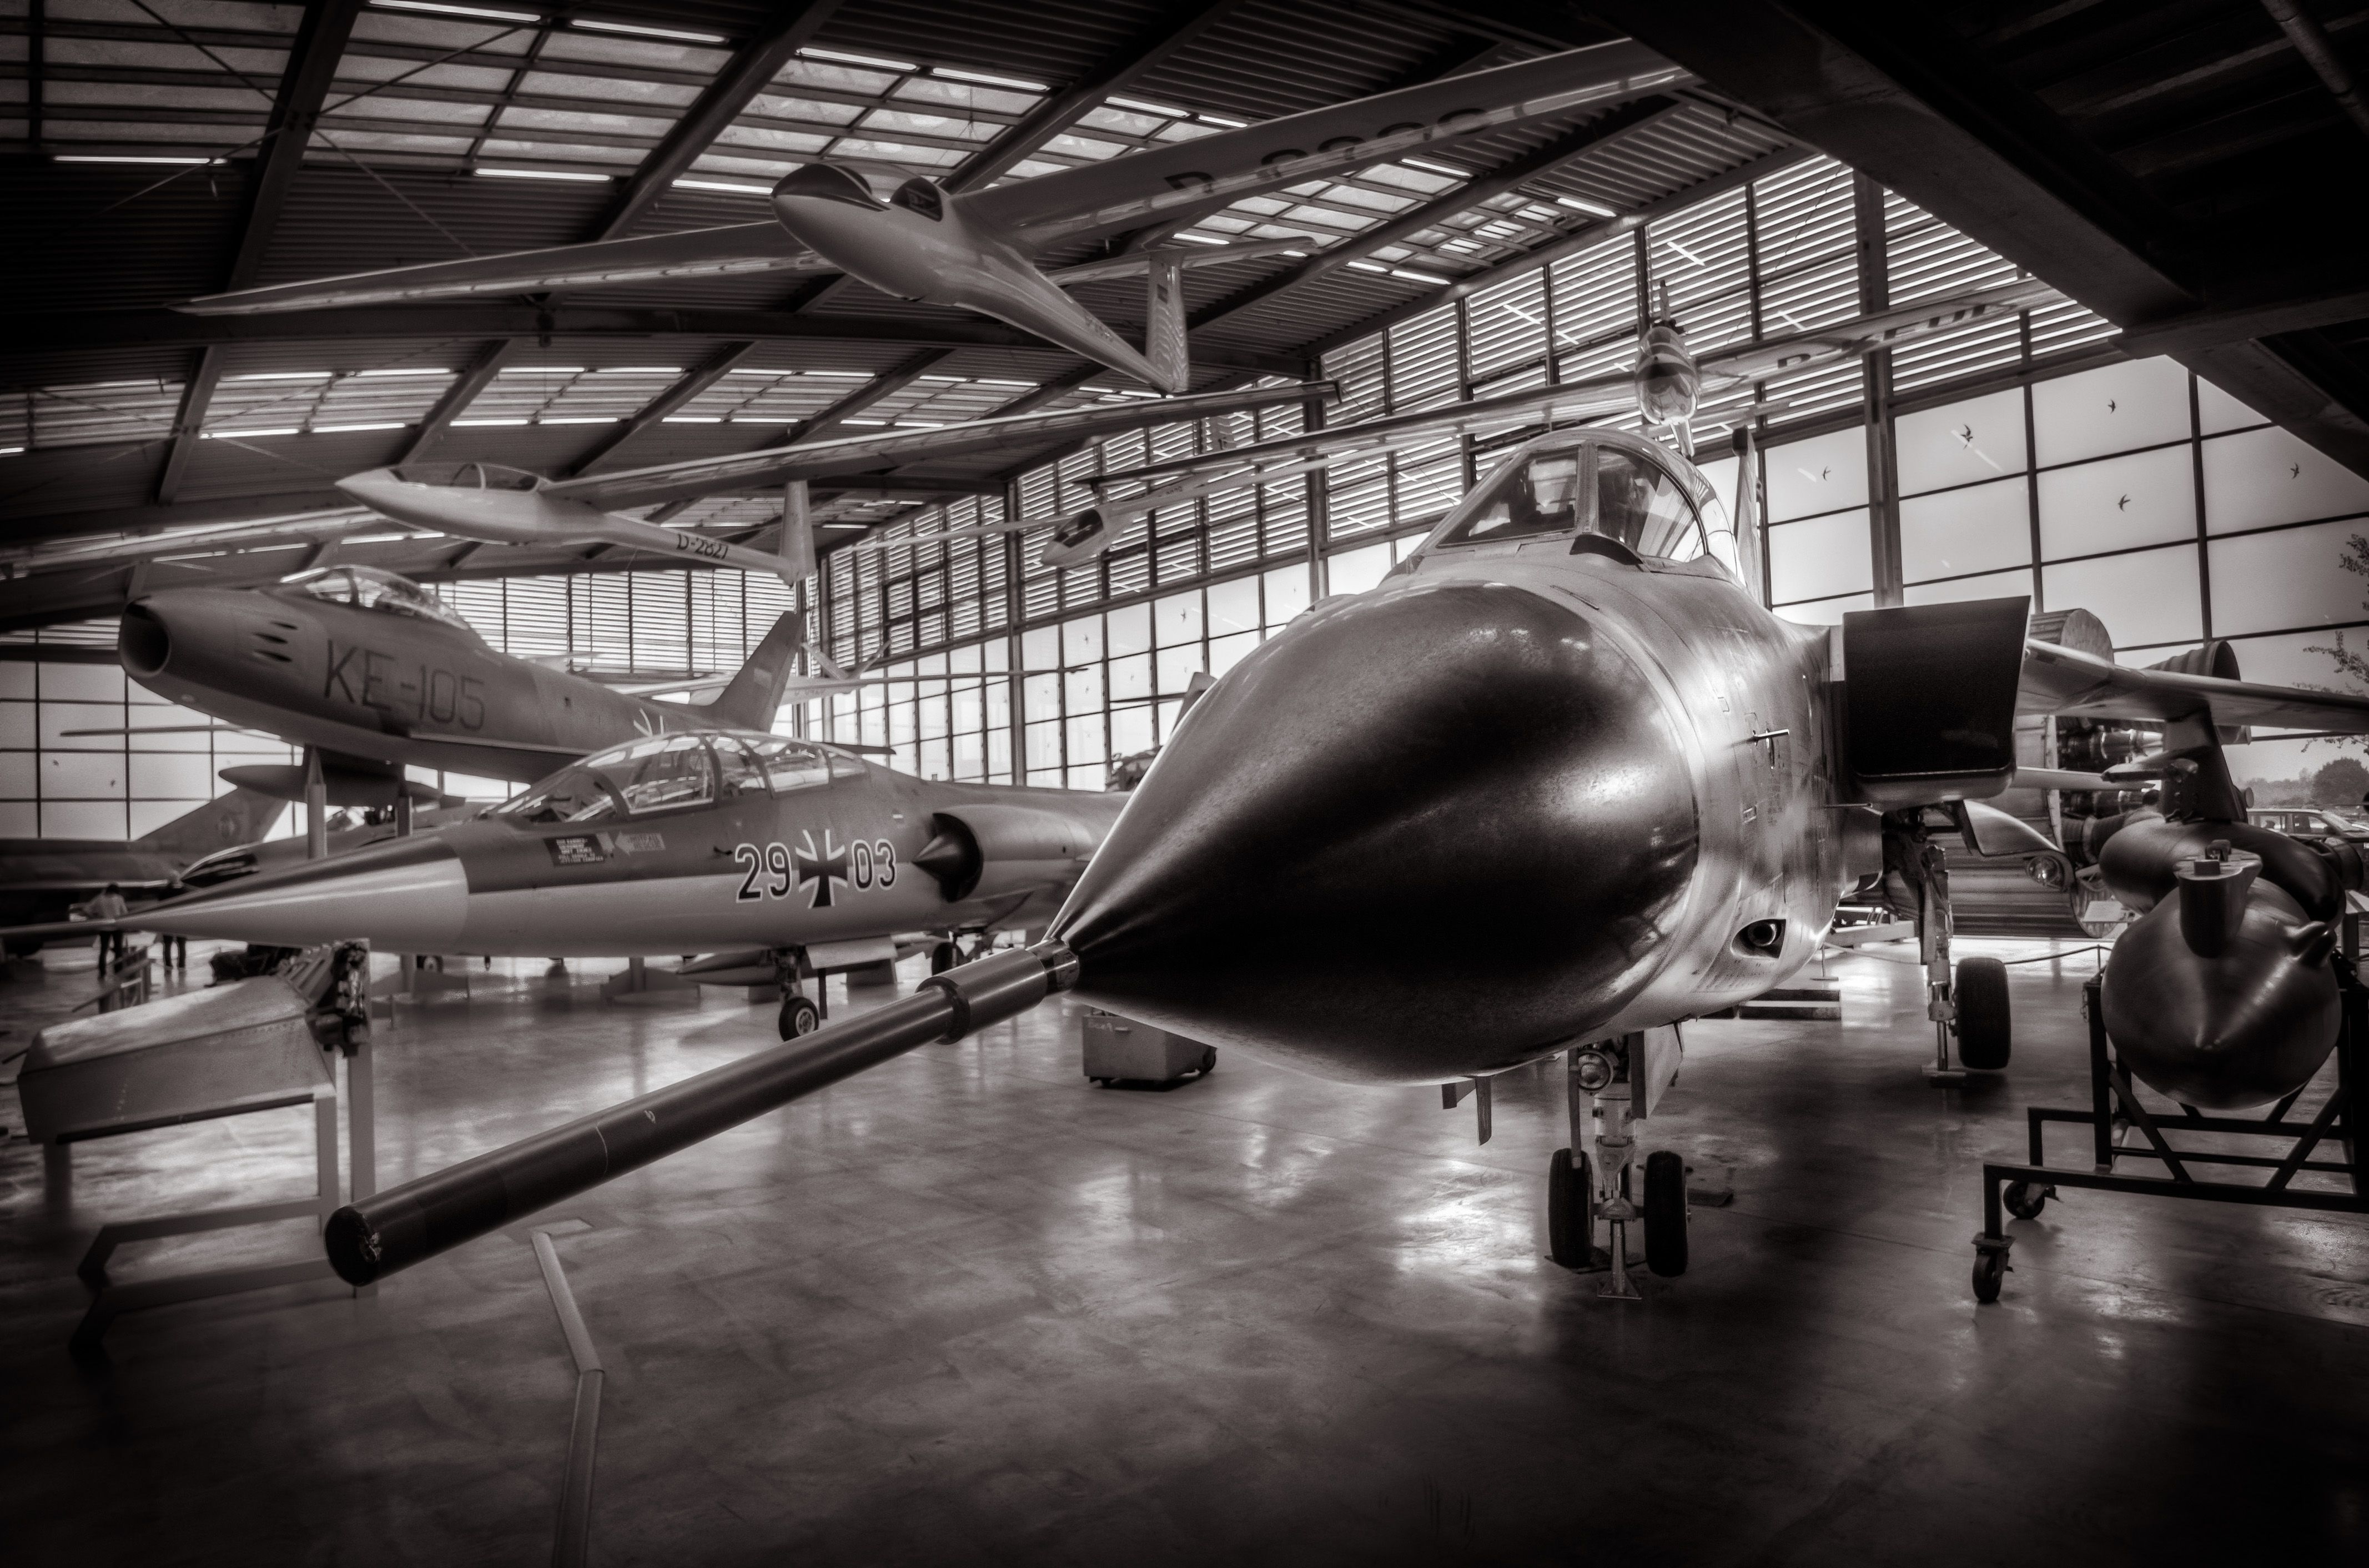 Wallpaper, hangar, aviation, black and white, airplane, aerospace engineering, aircraft, monochrome photography, tourist attraction, museum, space 4267x2824